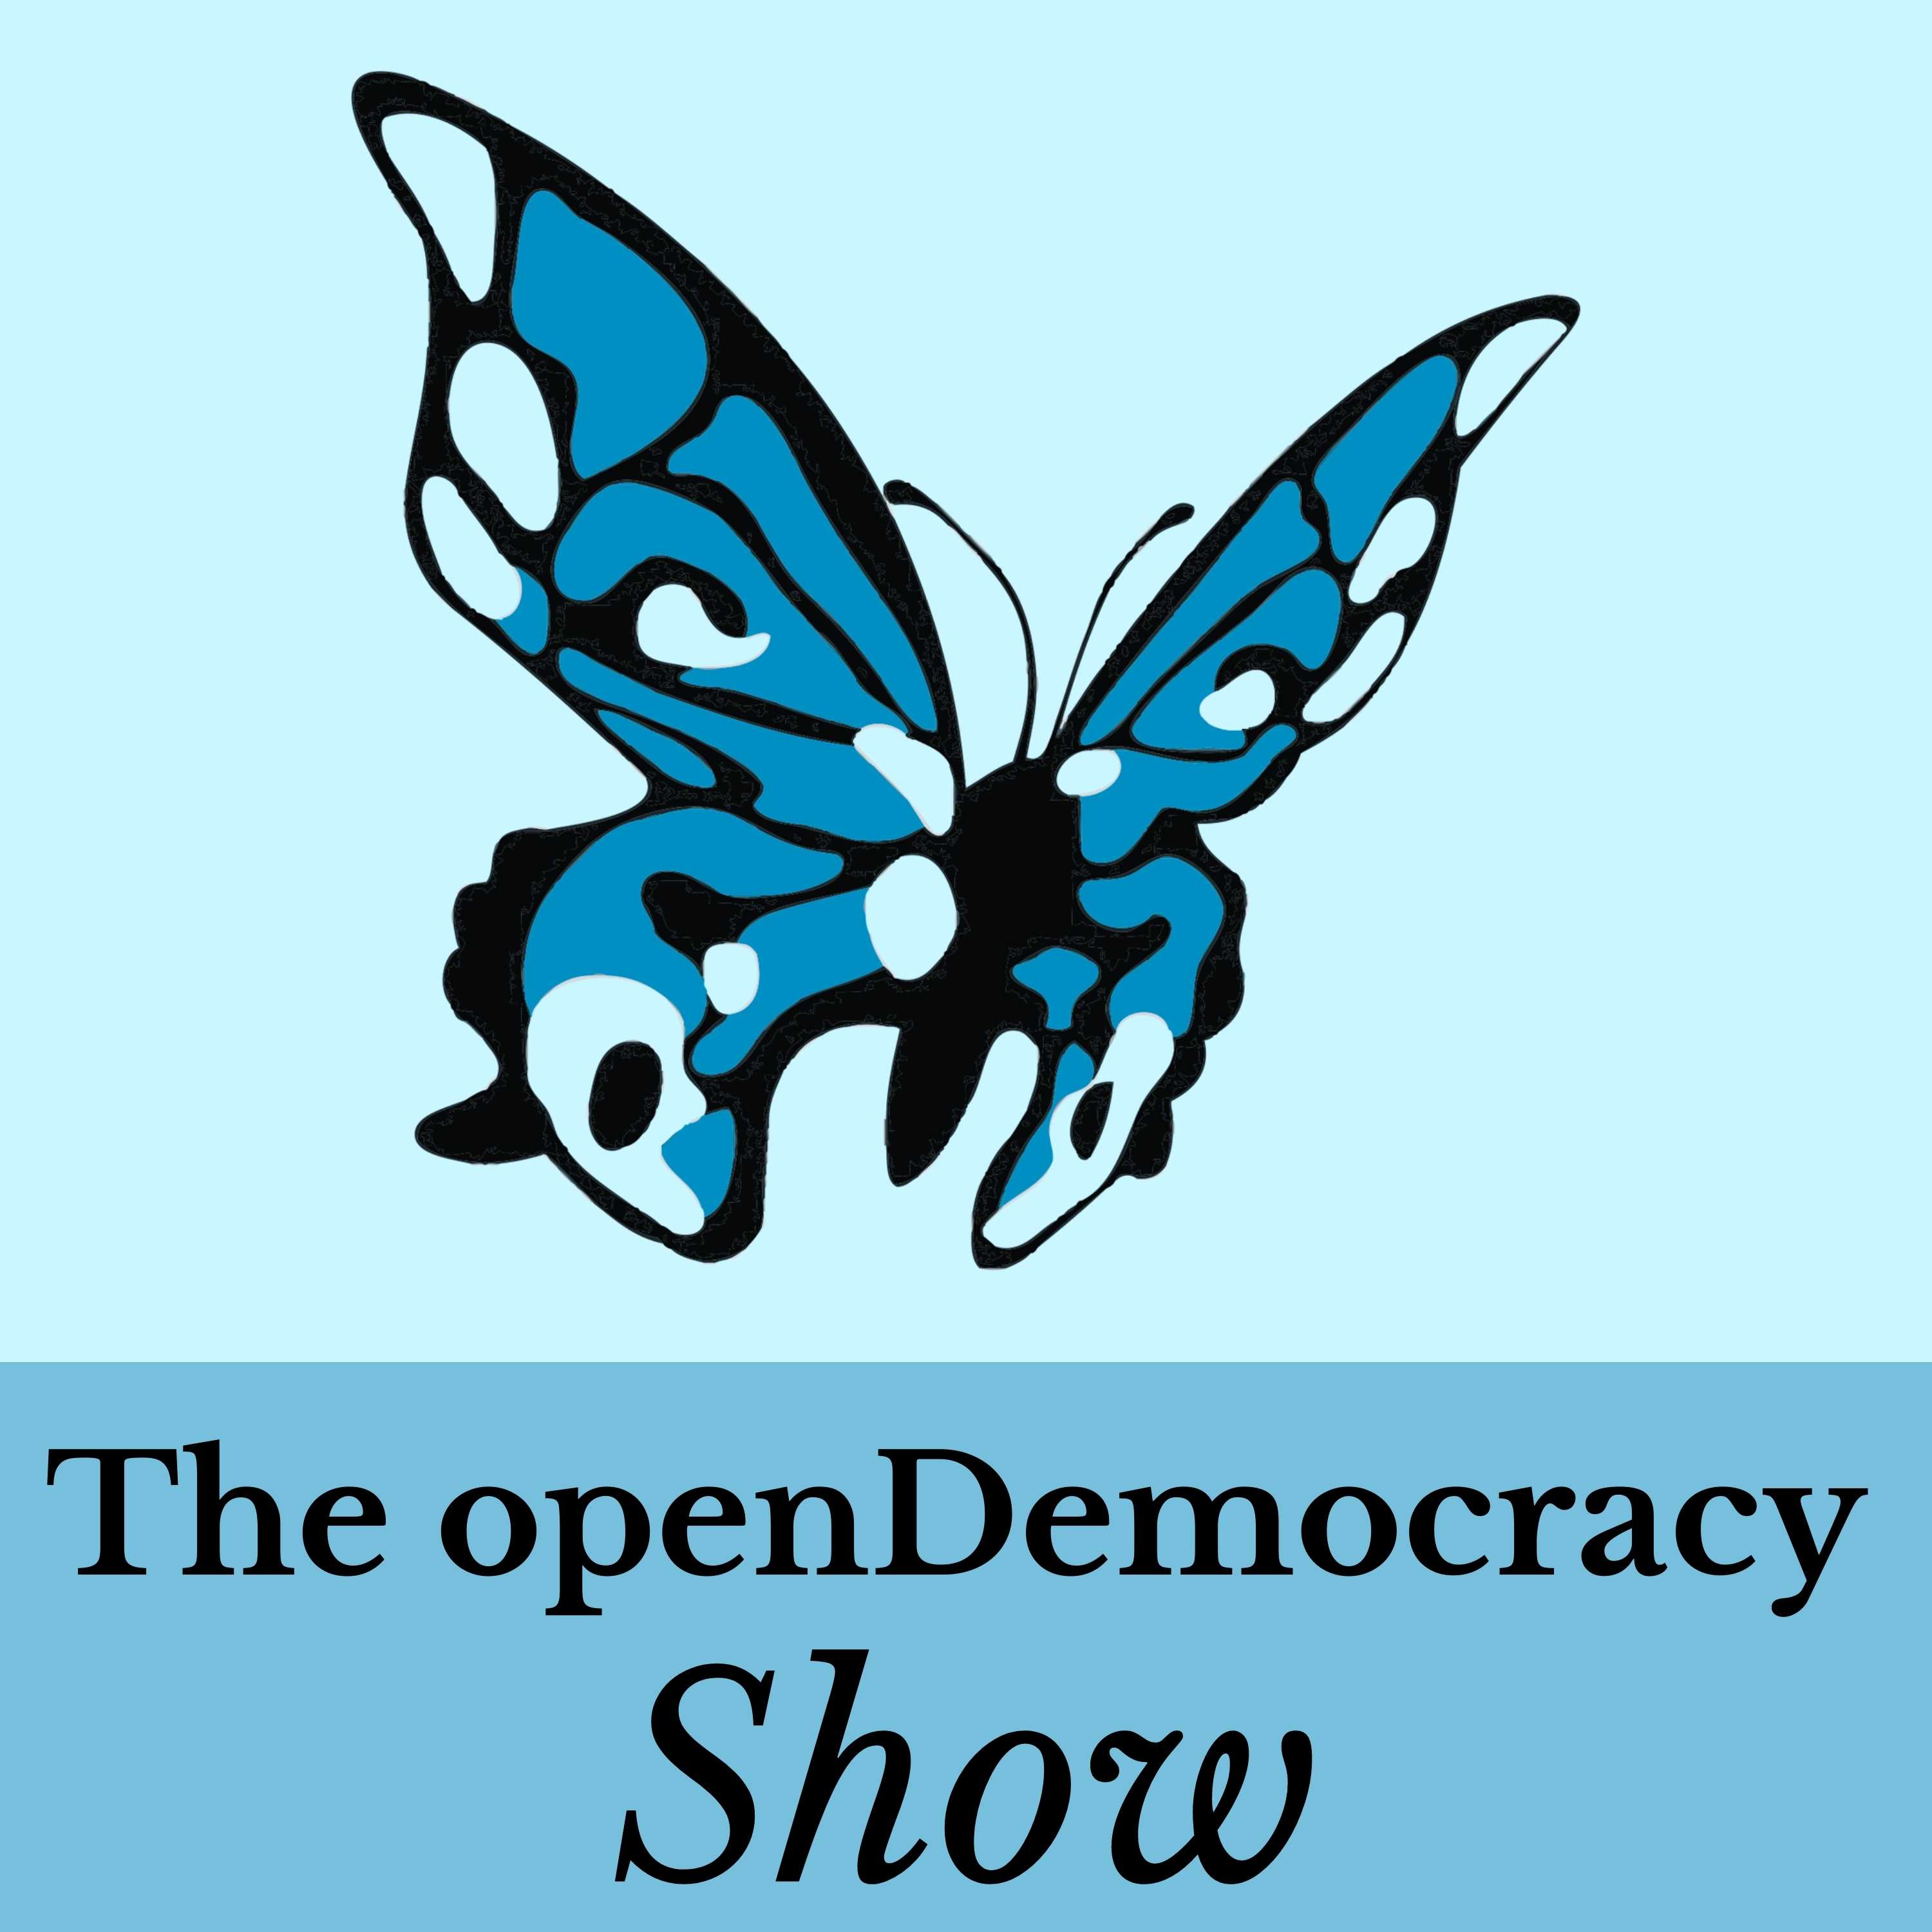 Artwork for The openDemocracy Show